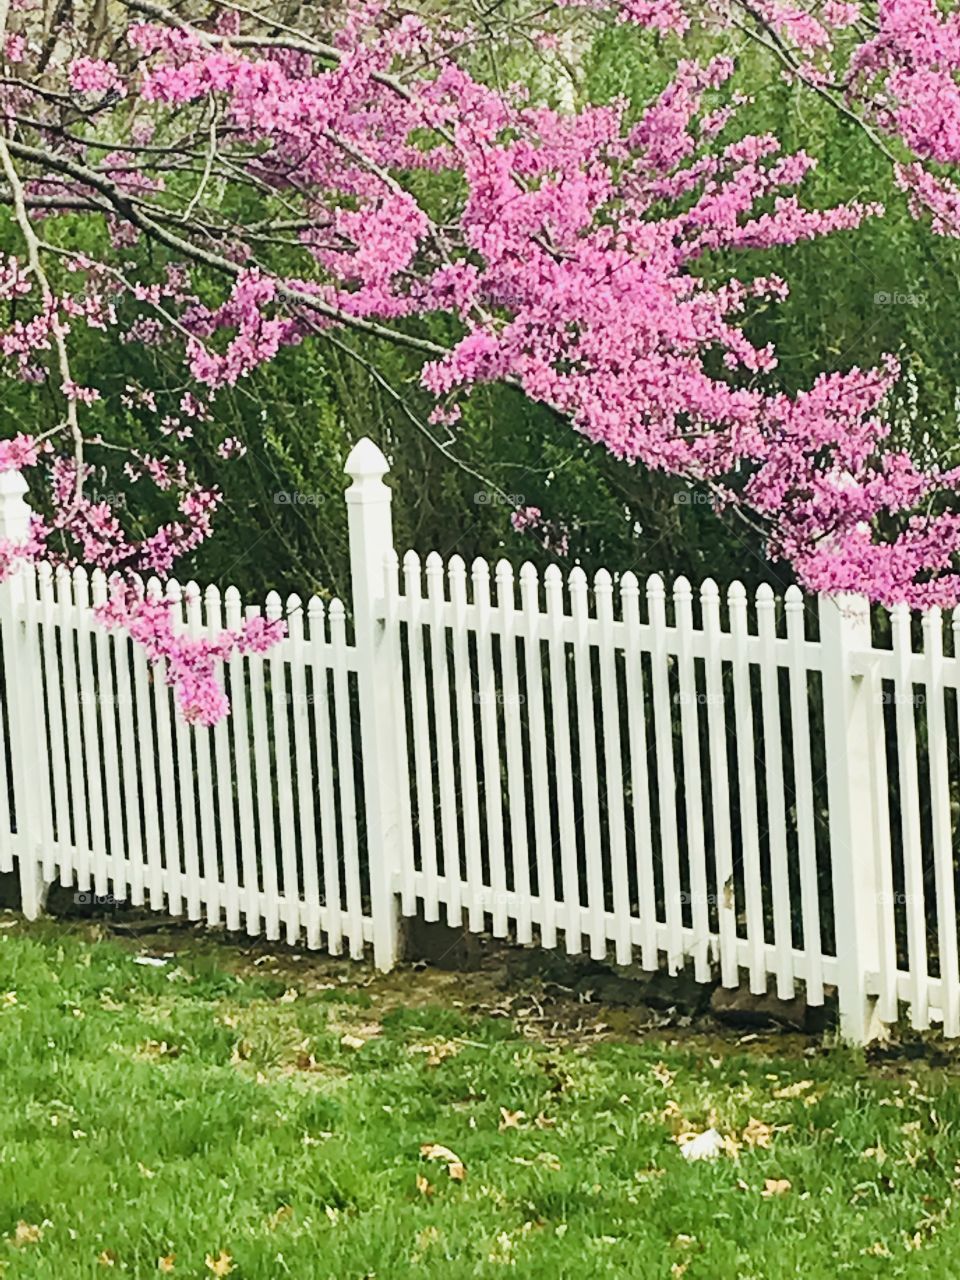 Backyard blooming tree and traditional white picket fence.